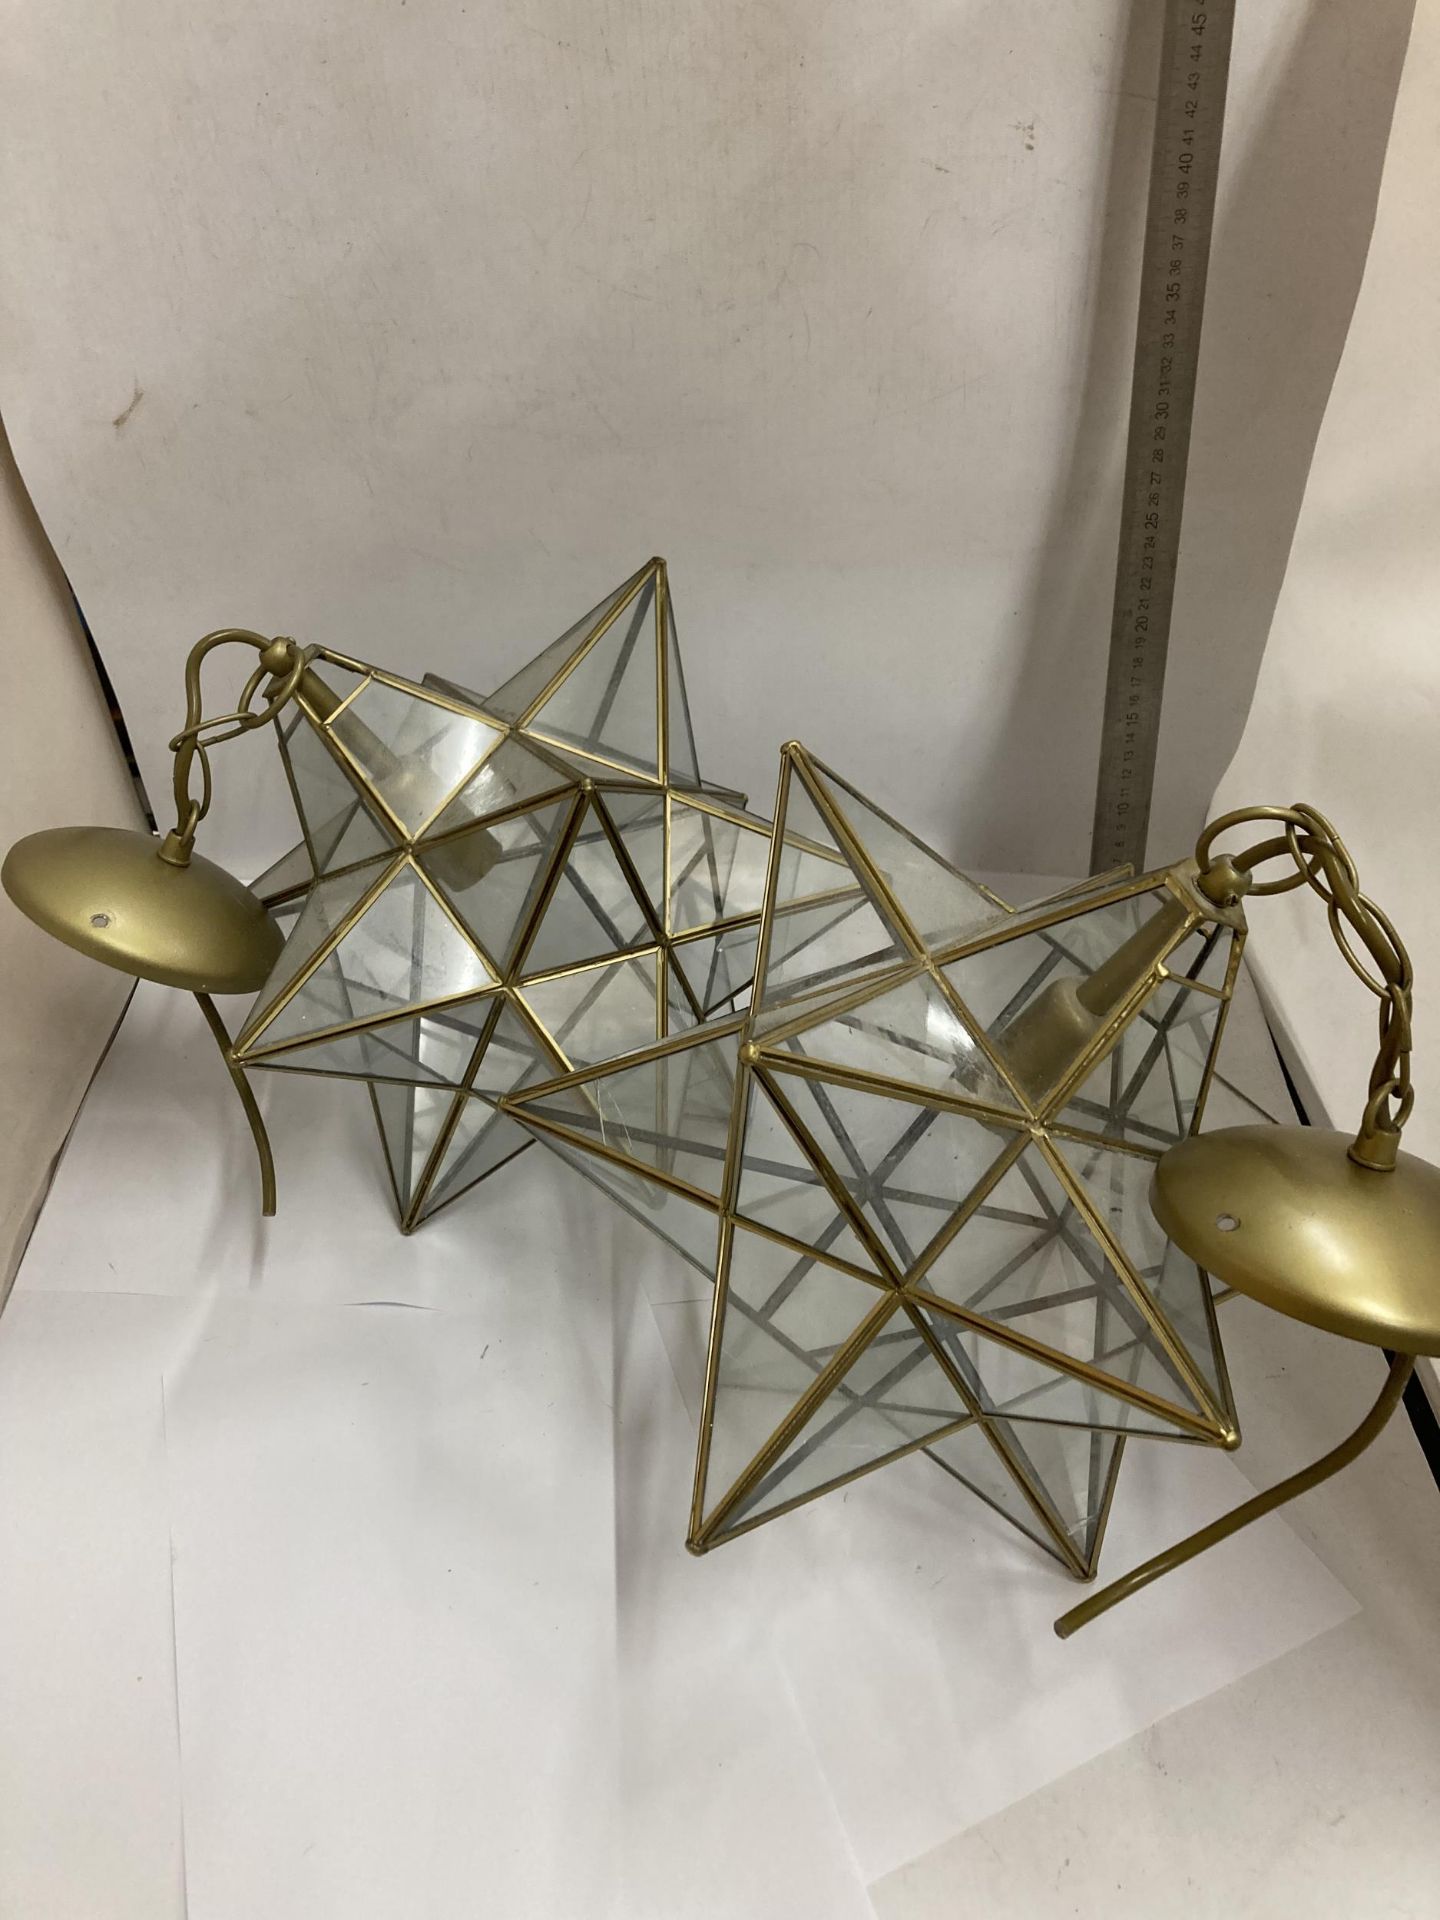 TWO GLASS STAR SHAPED CEILING LIGHT FITTINGS